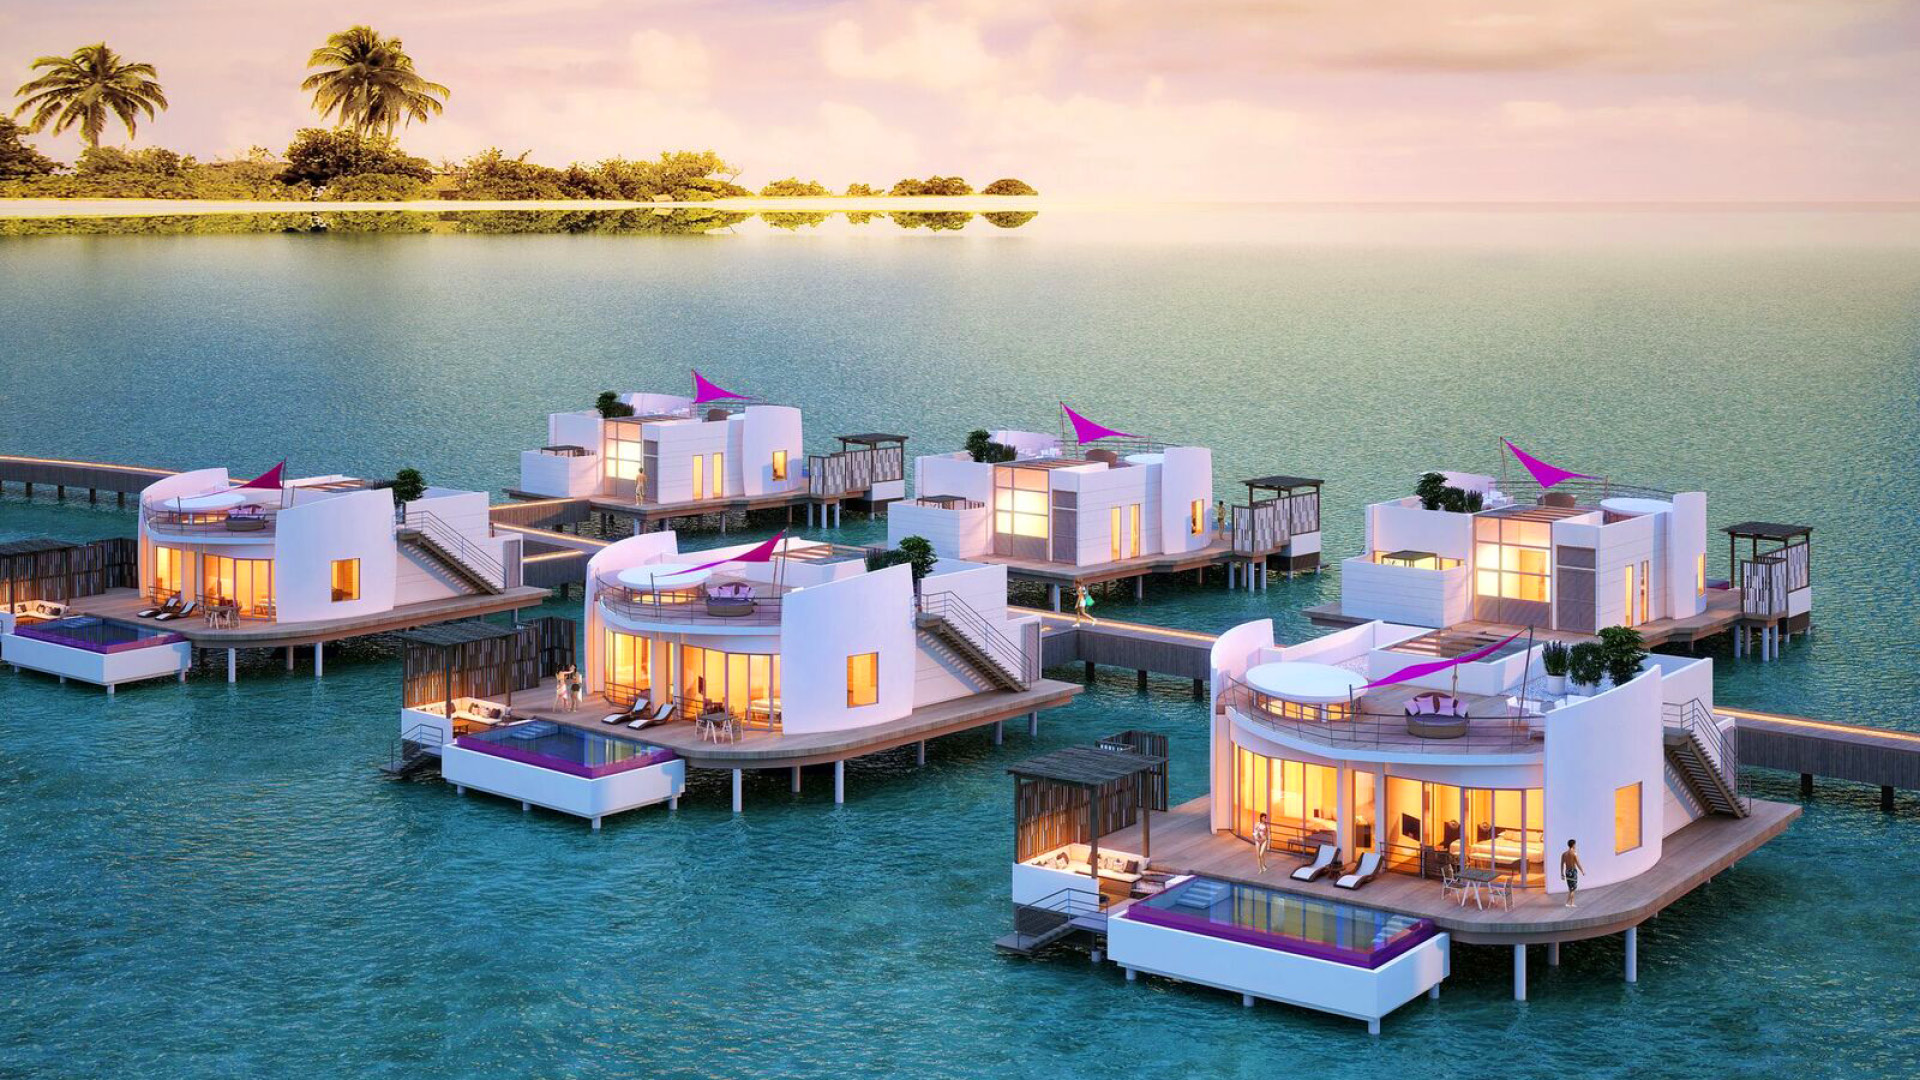 LUX* North Male Atoll Luxury Resort In The Maldives Is Calling You